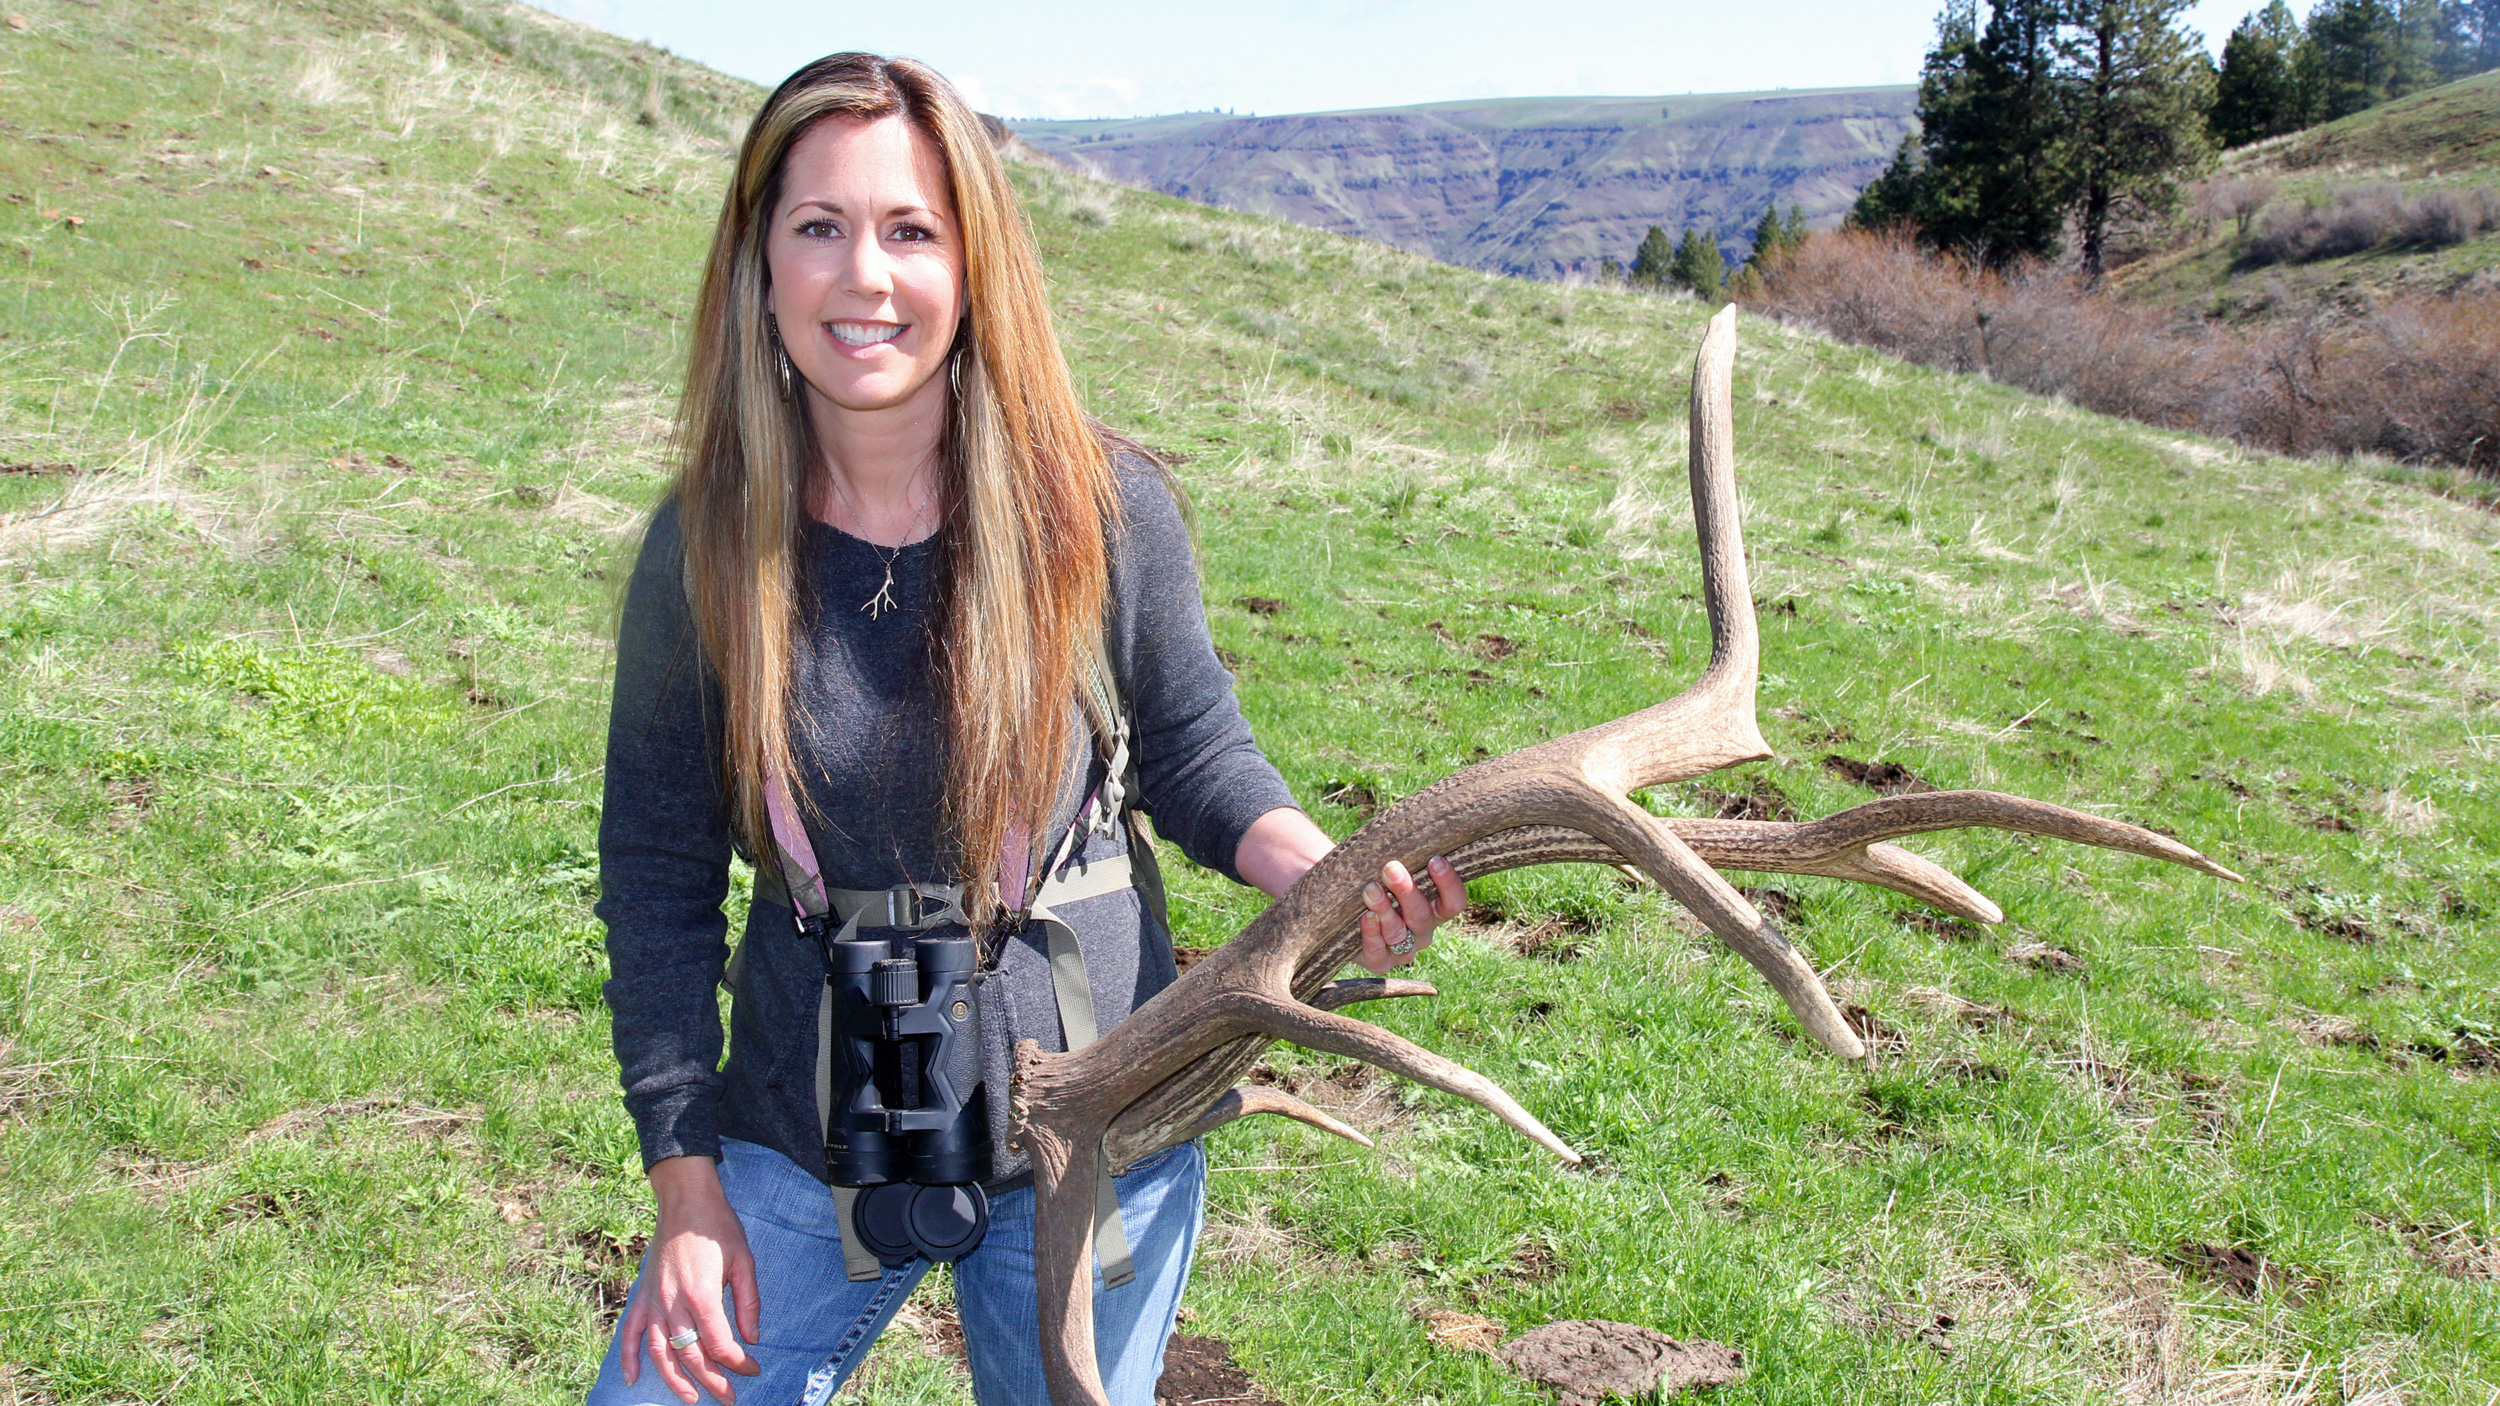 Outdoor enthusiast Terry Hook and her family are expert shed hunters. Photo © The Nature Conservancy (Matt Miller)